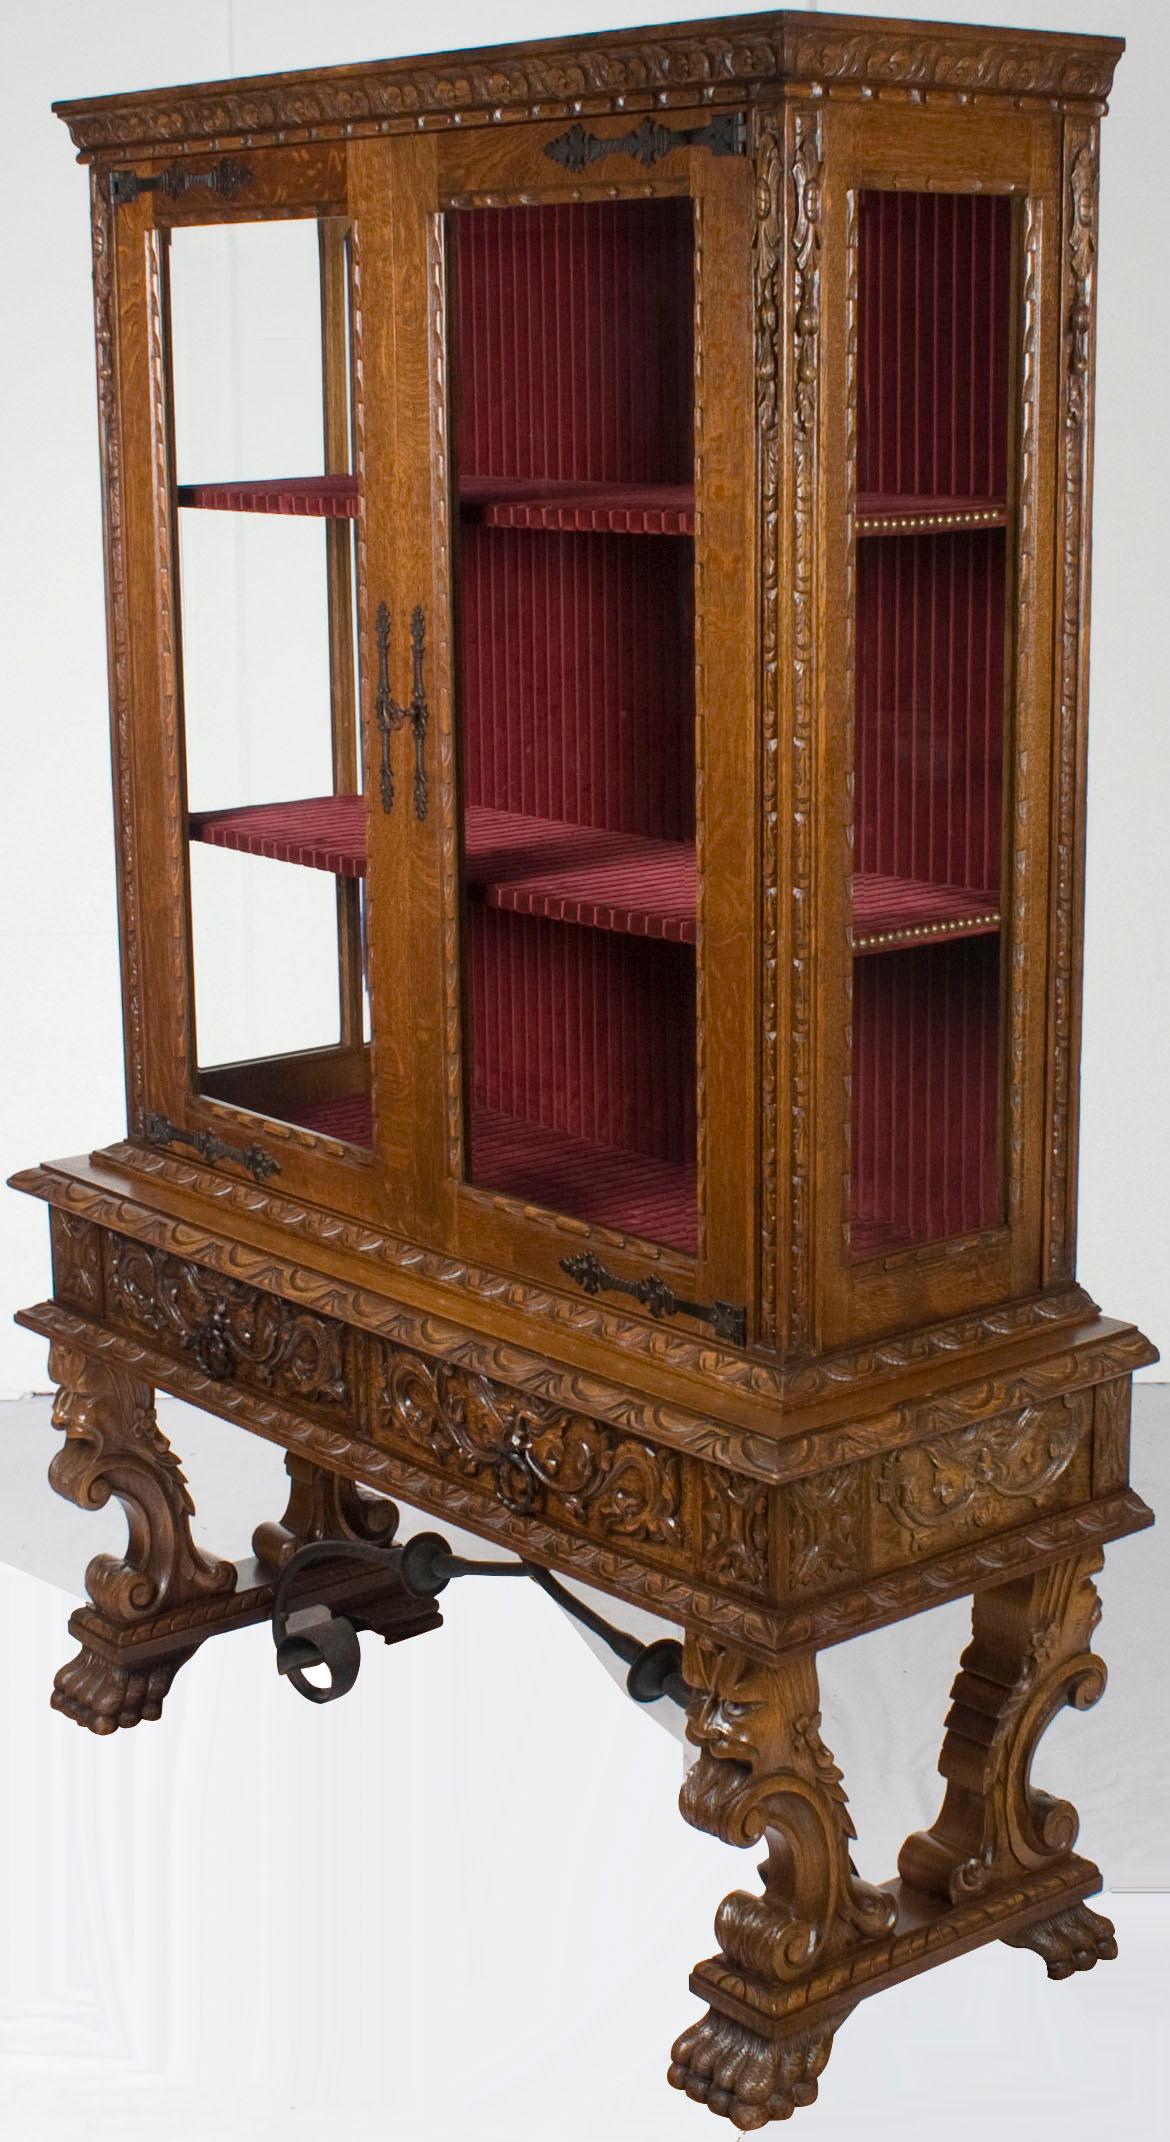 Typical of the style, this antique French Renaissance bookcase is decorated in elaborate hand carvings. The wood used is beautiful oak and that oak has developed a wonderful patina over the years.

The carvings are the most unique and wonderful